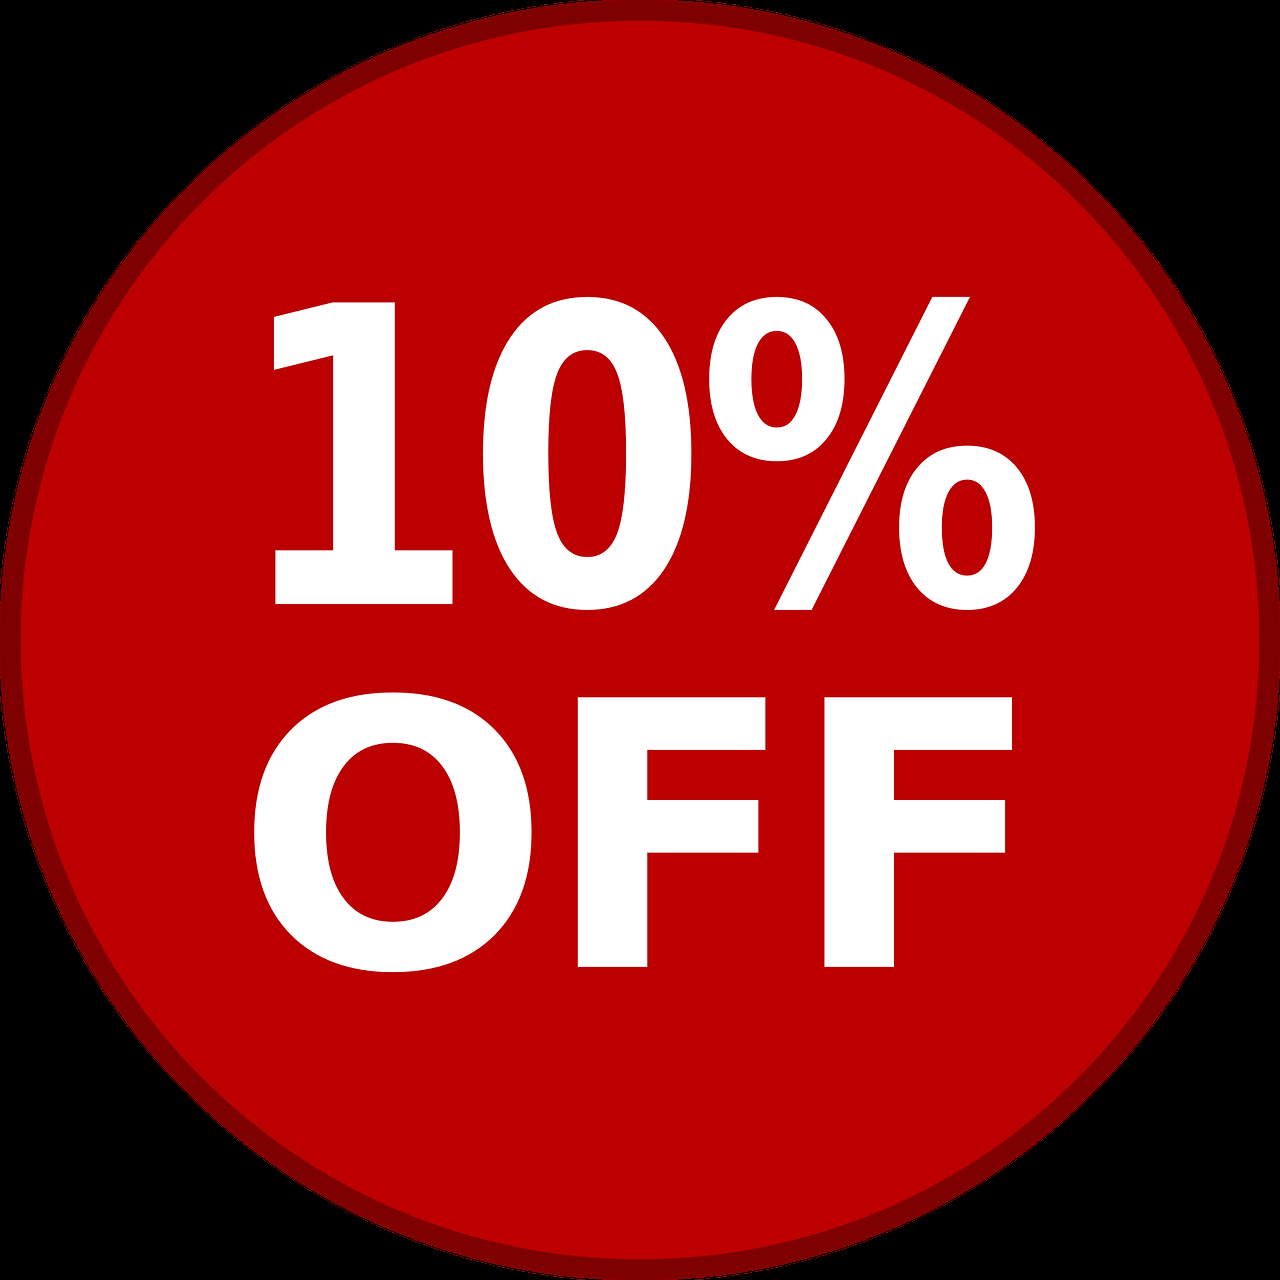 10% DISCOUNT ON YOUR SUMMER CAMP BOOKING